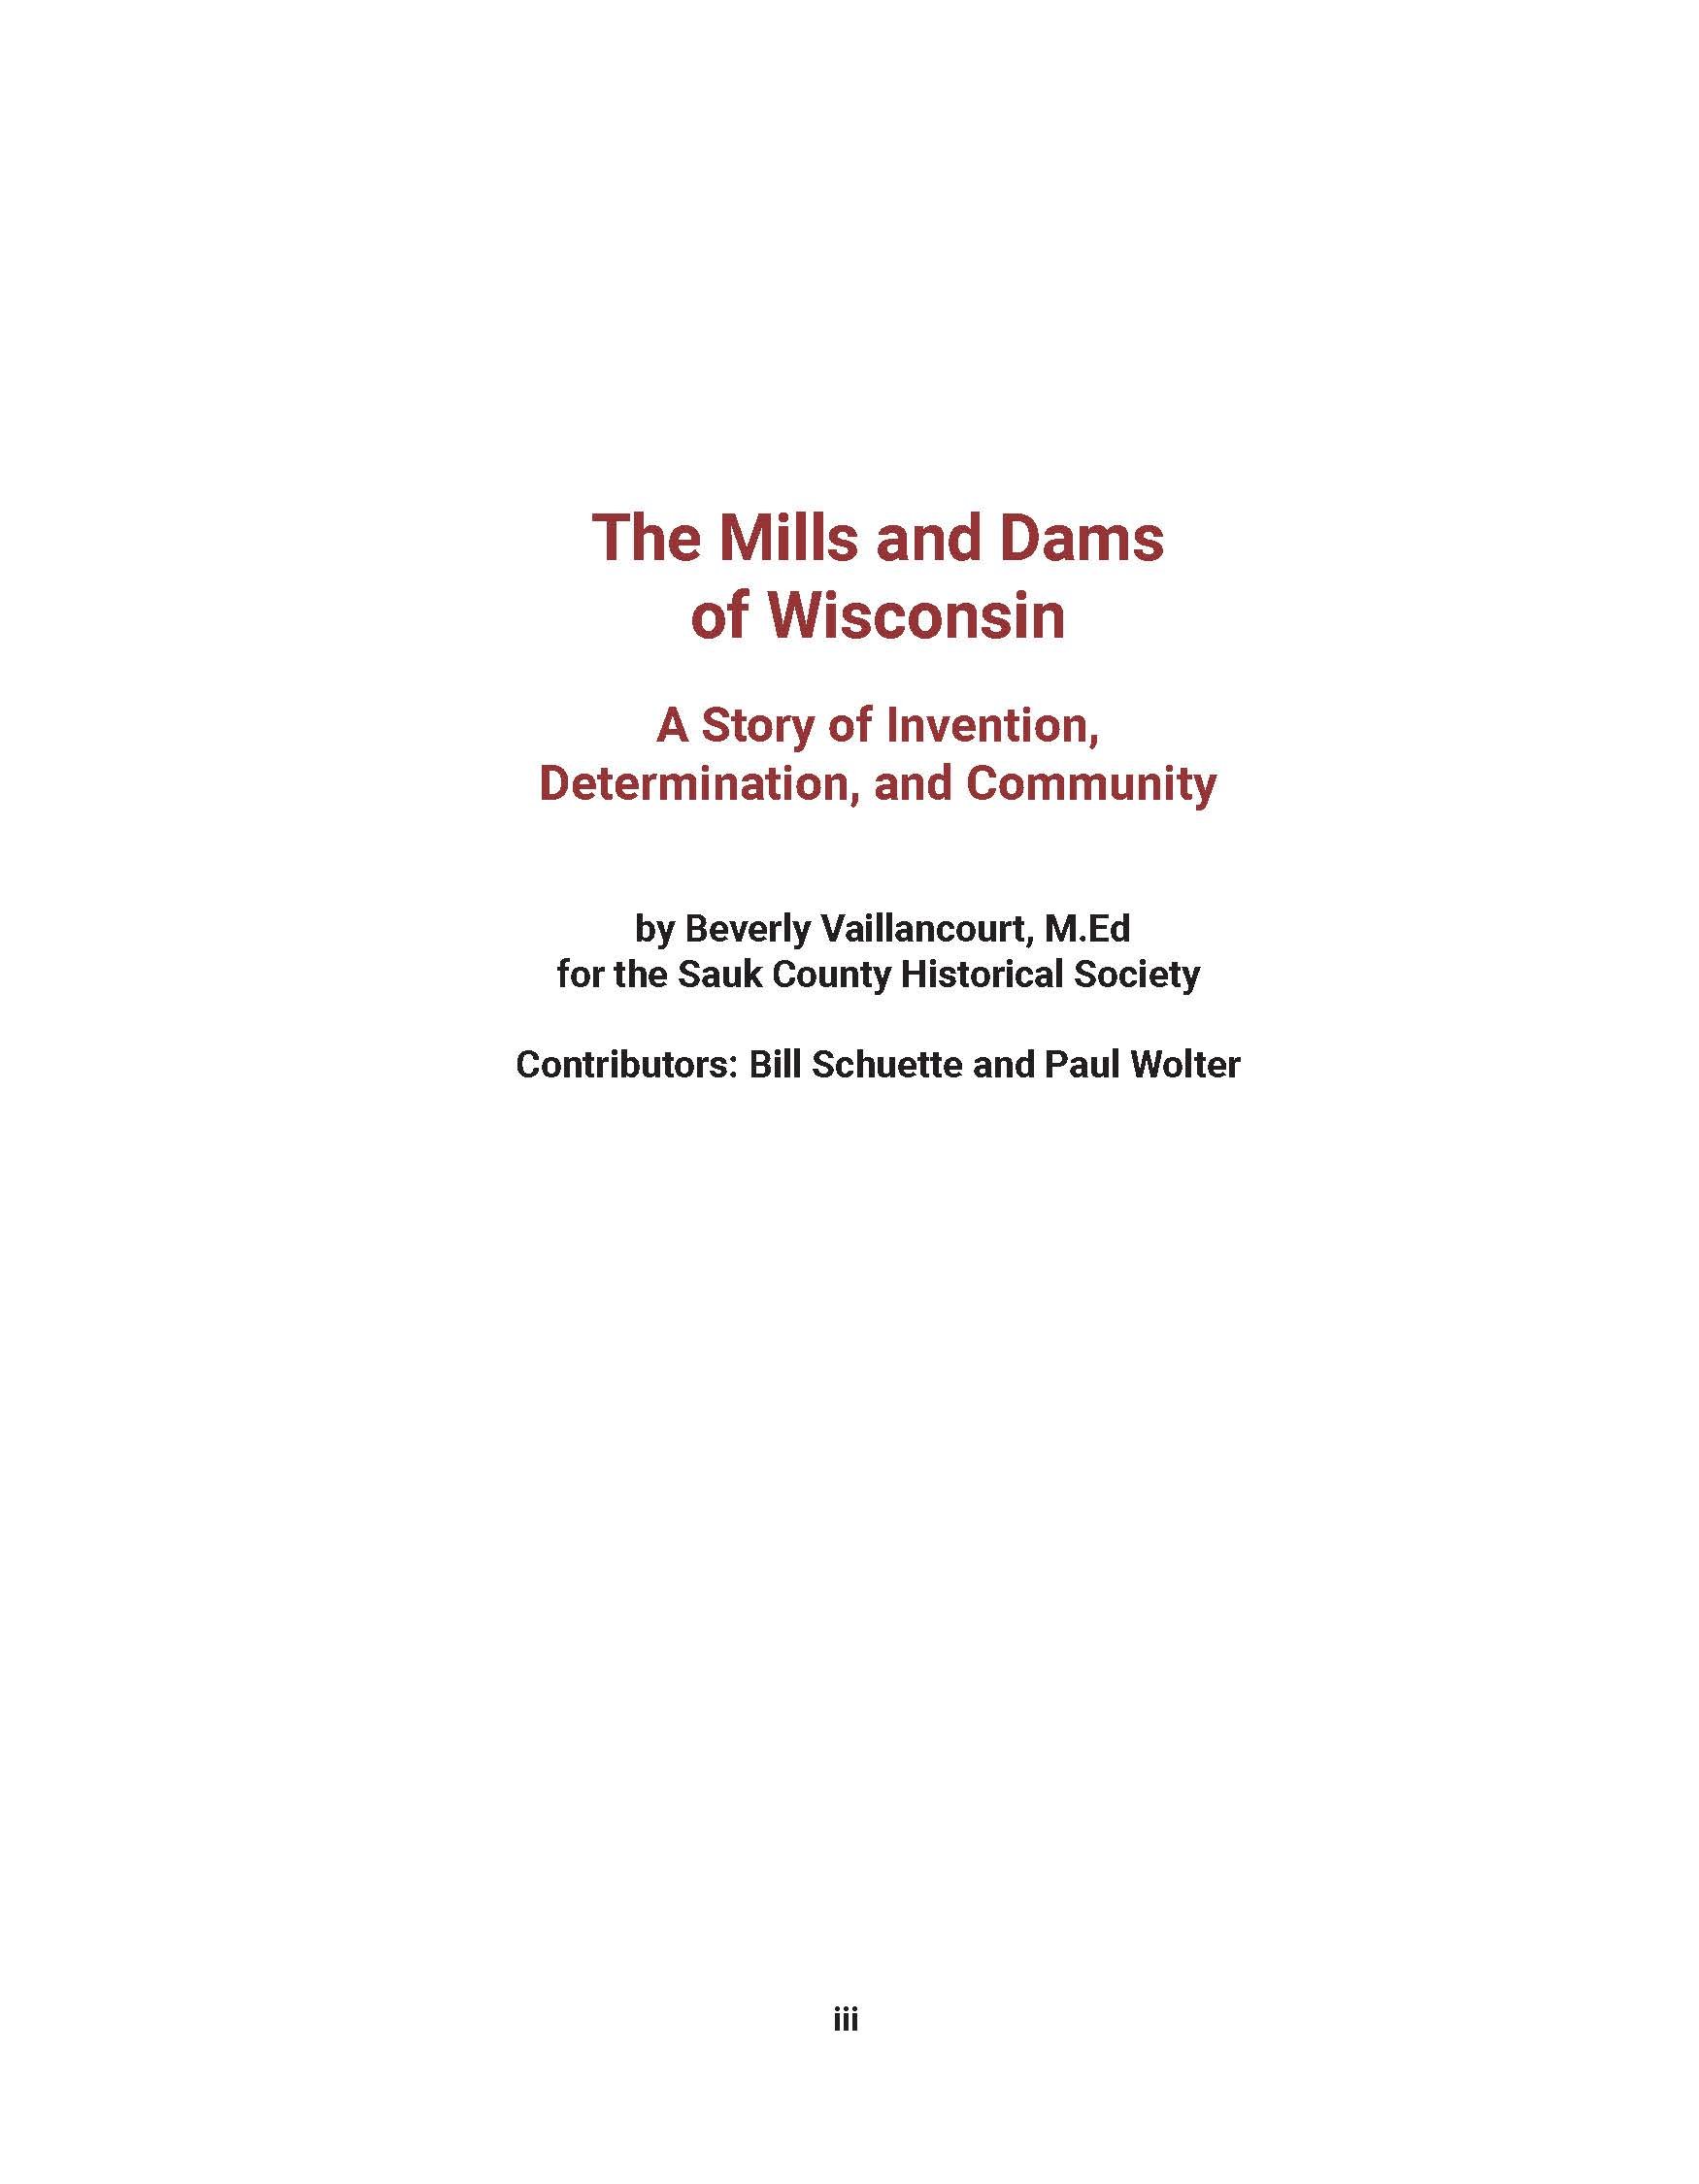 Mills and Dams_final_8_22_issue (1)_Page_03.jpg